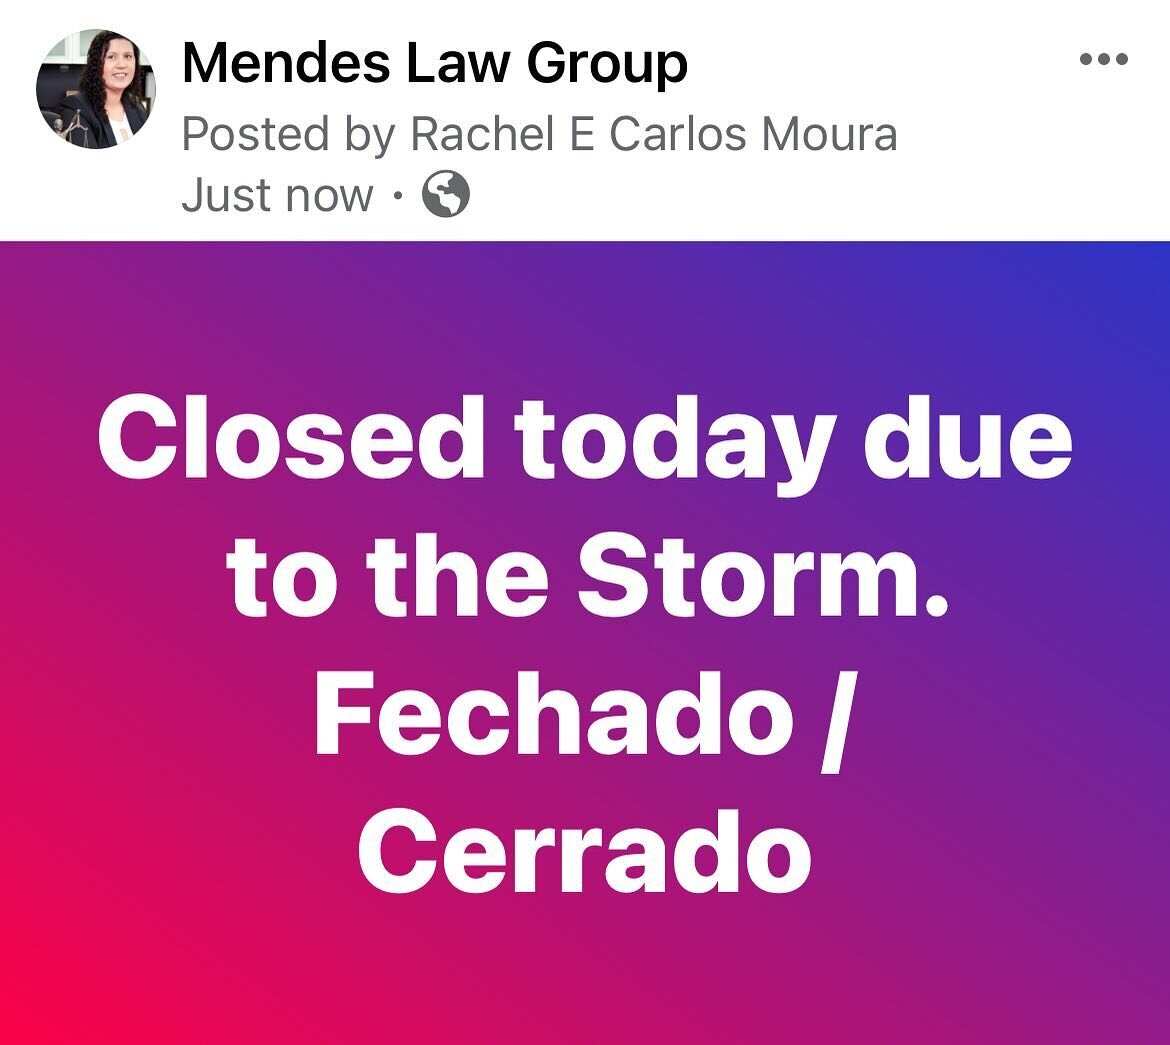 Closed today due to the storm.